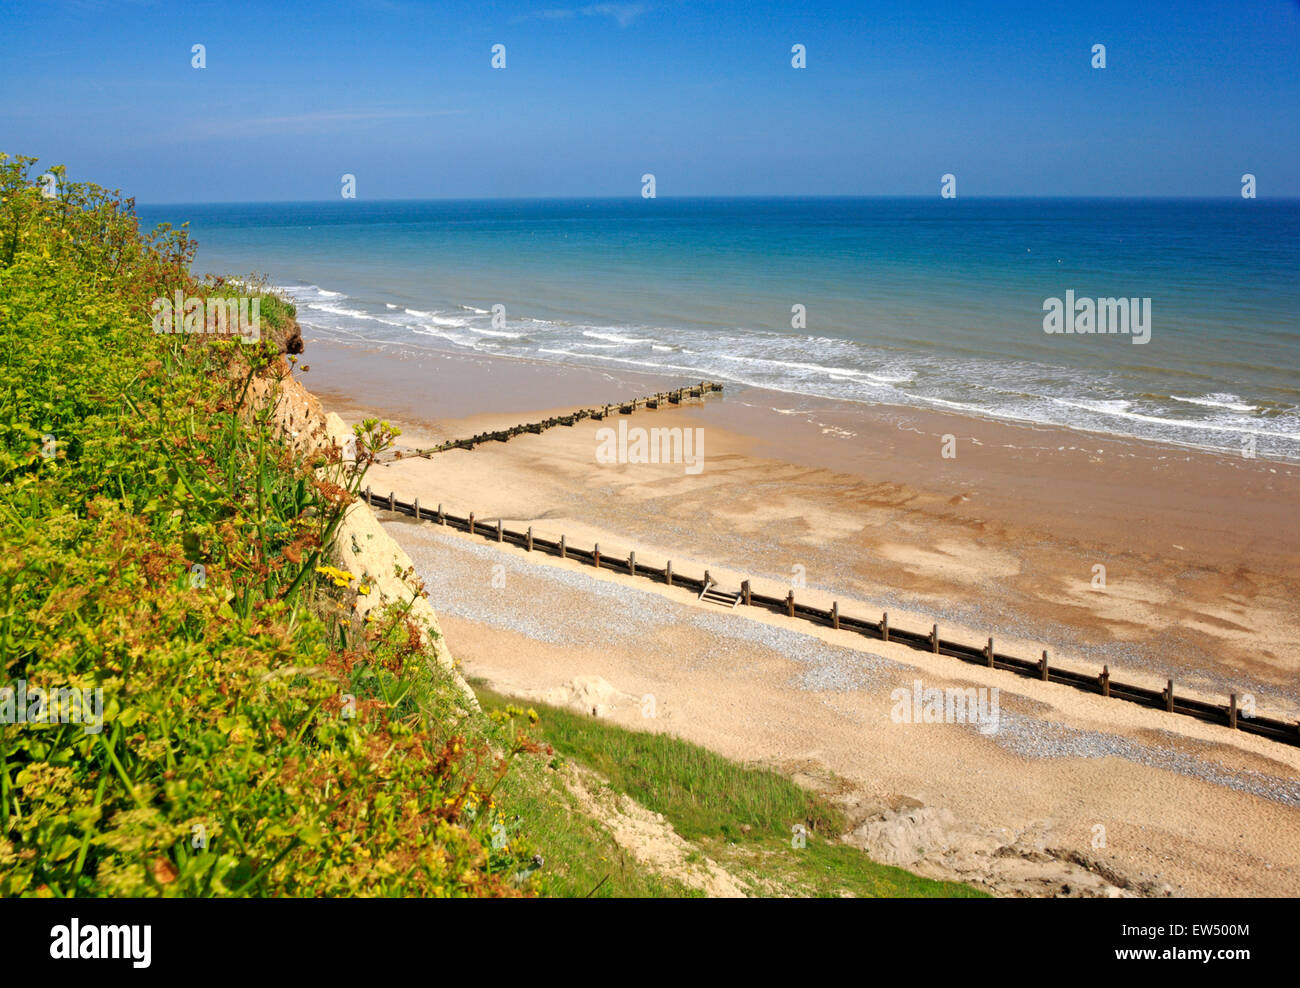 A view of the beach from the cliffs at the North Norfolk village of Overstrand, Norfolk, England, United Kingdom. Stock Photo